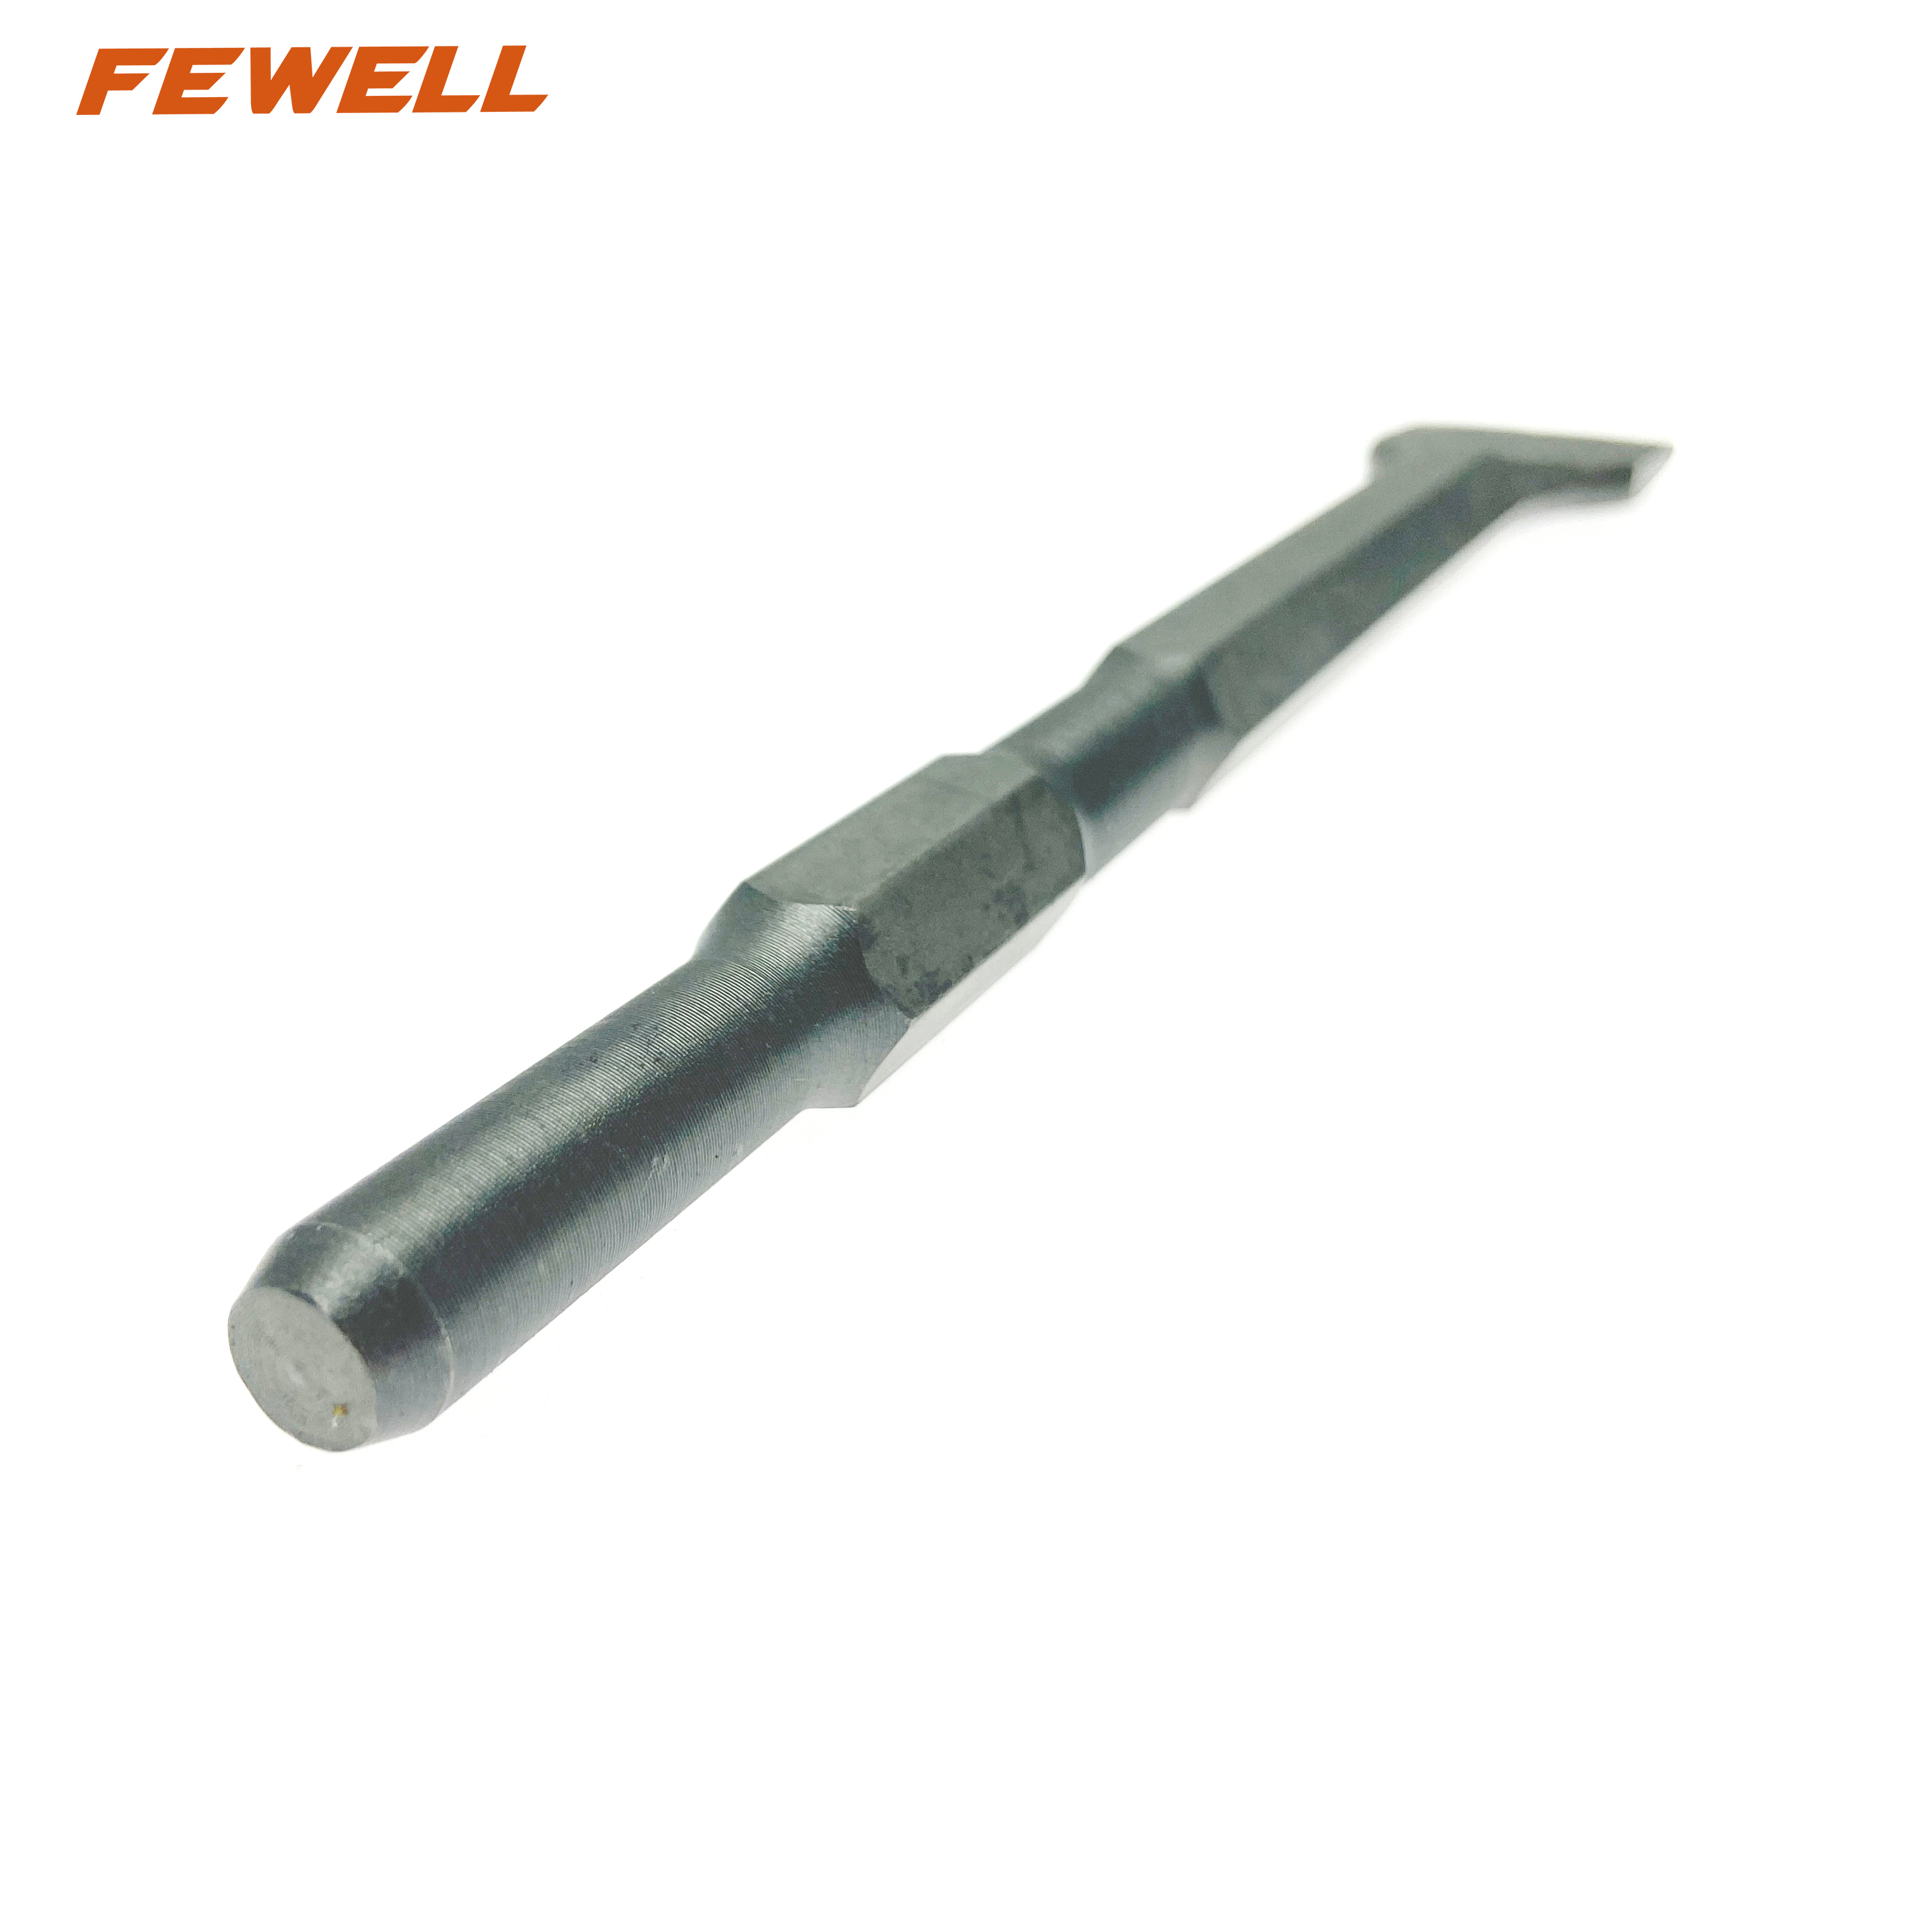 High quality 17x280x40mm Electric Hammer Drill Bit Hex shank Flat Wide Spade Chisel for Masonry Concrete Brick stone